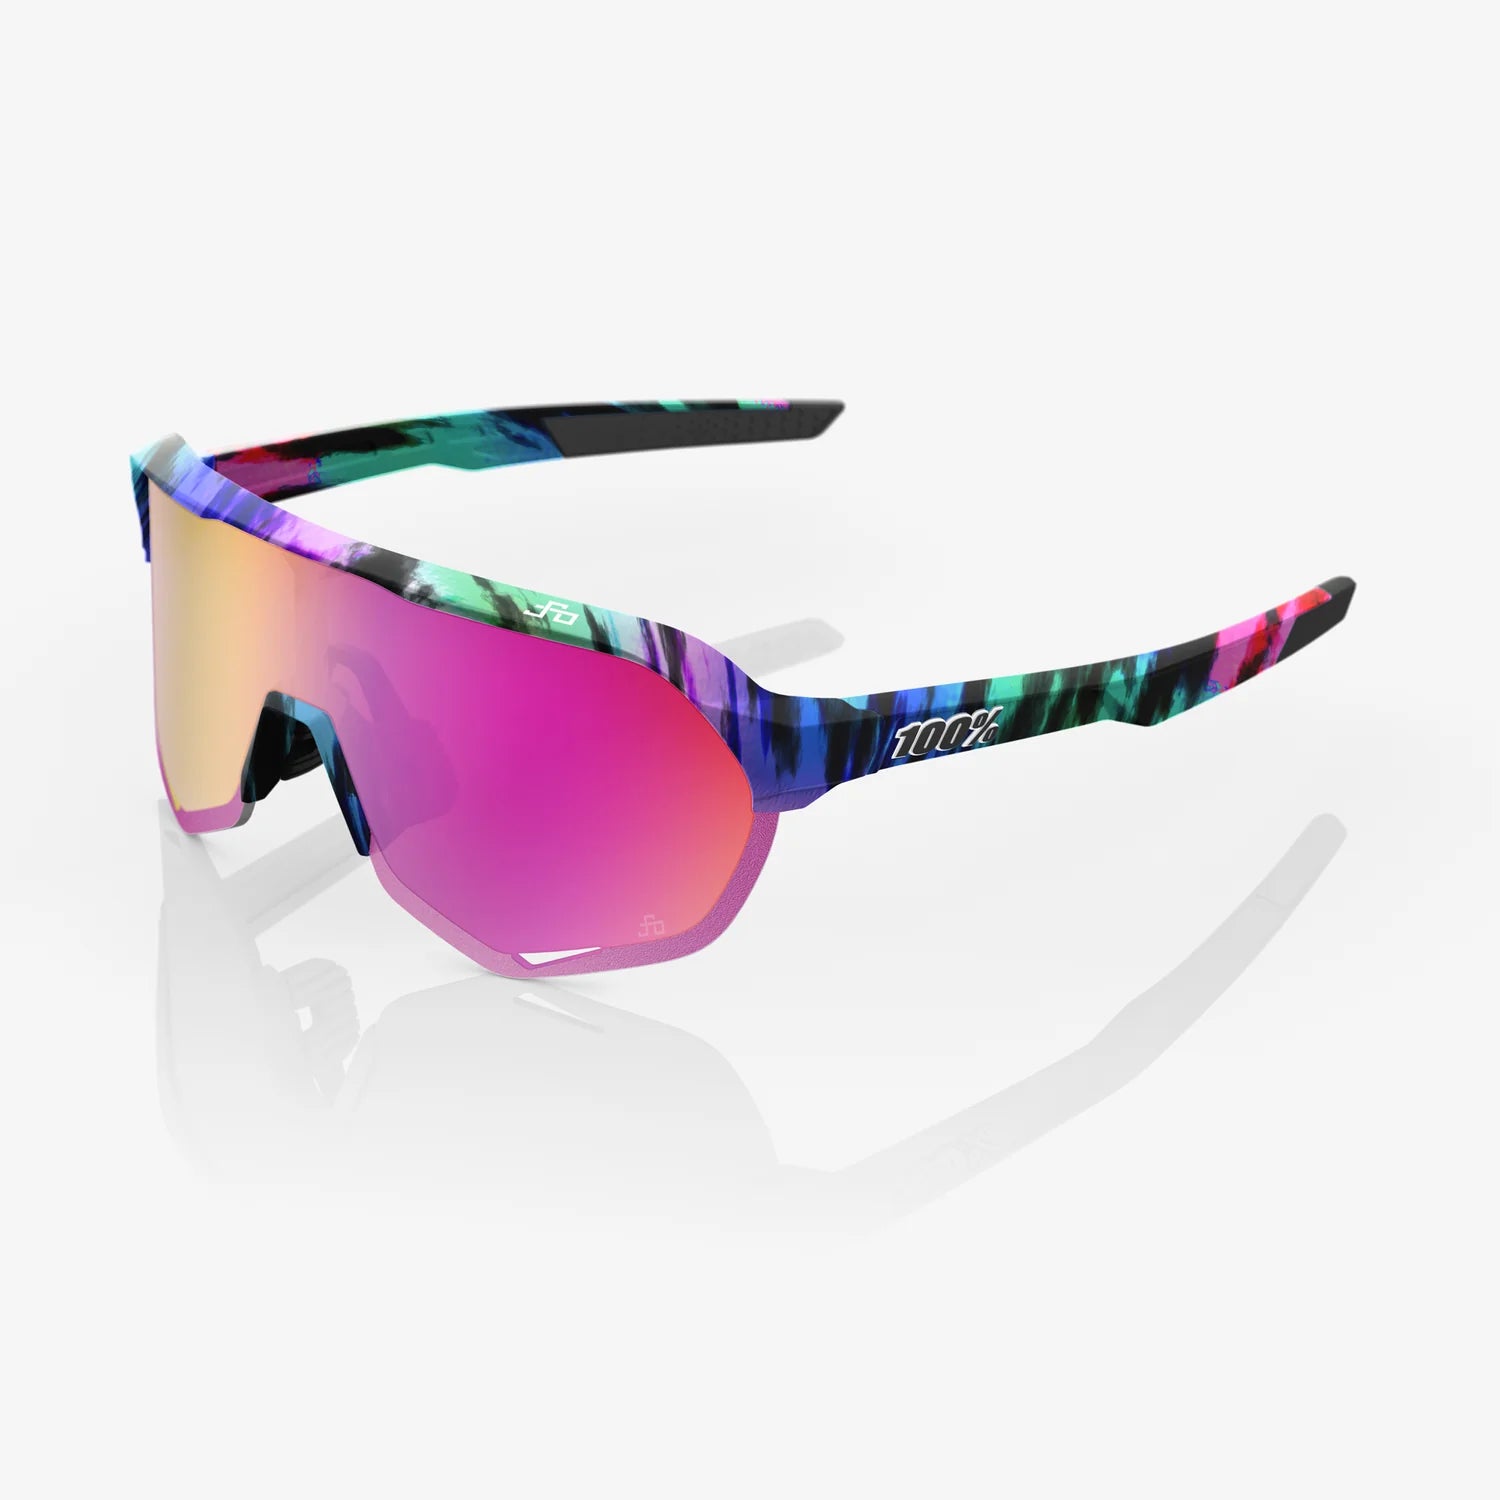 100% S2 Limited Edition Peter Sagan Special Sunglasses – Stinger